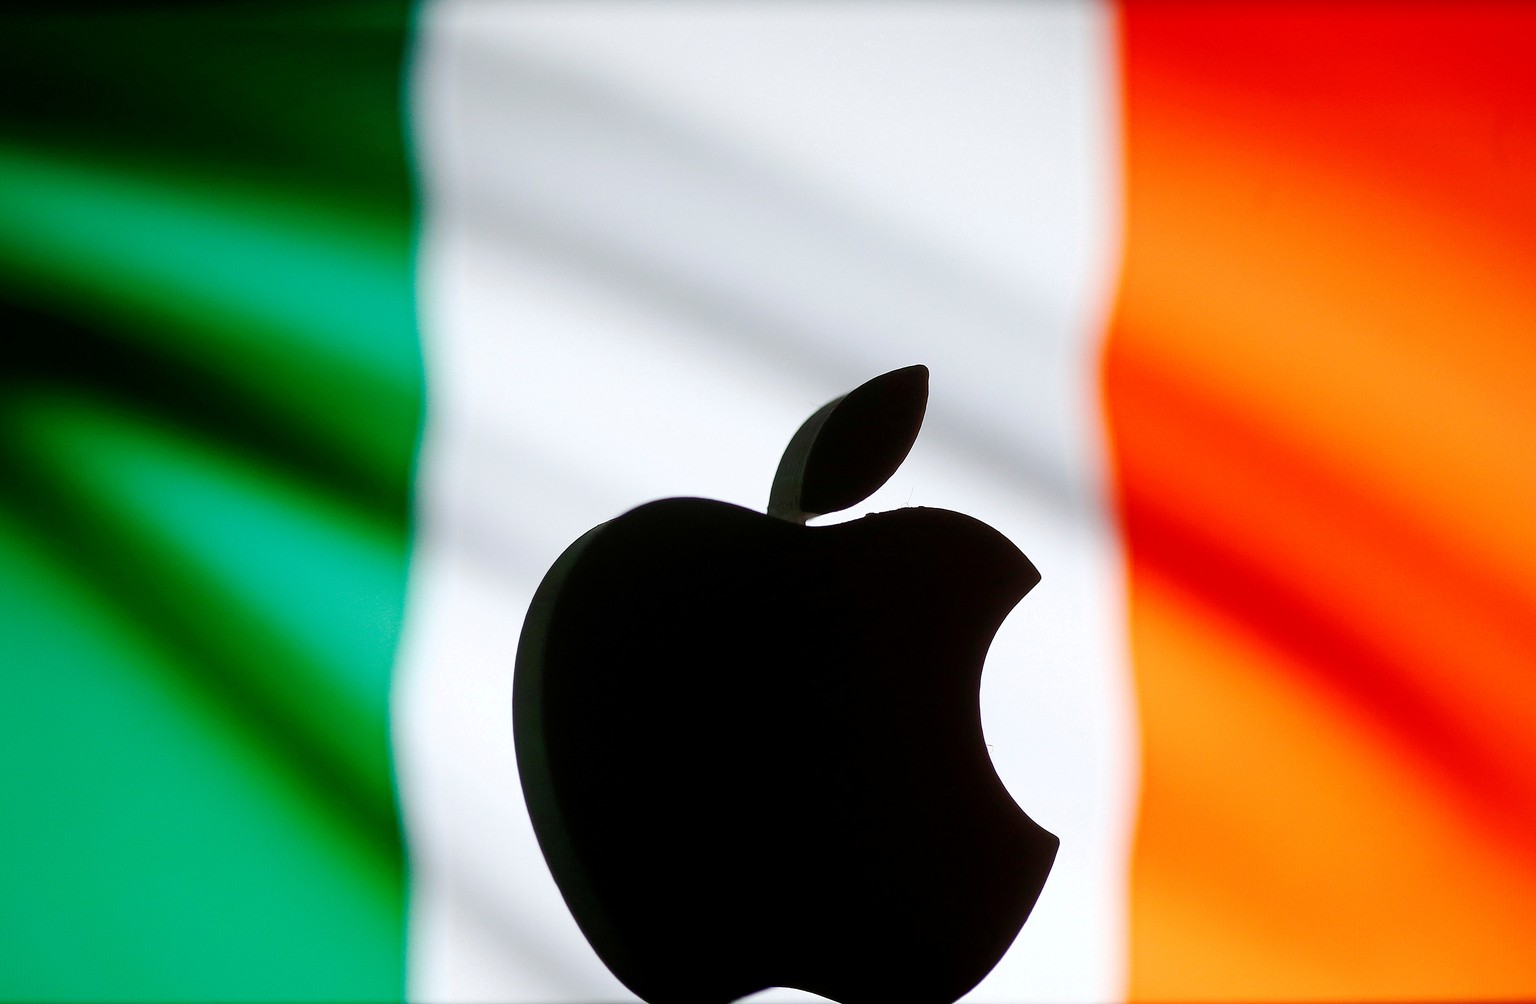 FILE PHOTO: A 3D printed Apple logo is seen in front of a displayed Irish flag in this illustration taken September 2, 2016. REUTERS/Dado Ruvic/Illustration/File Photo